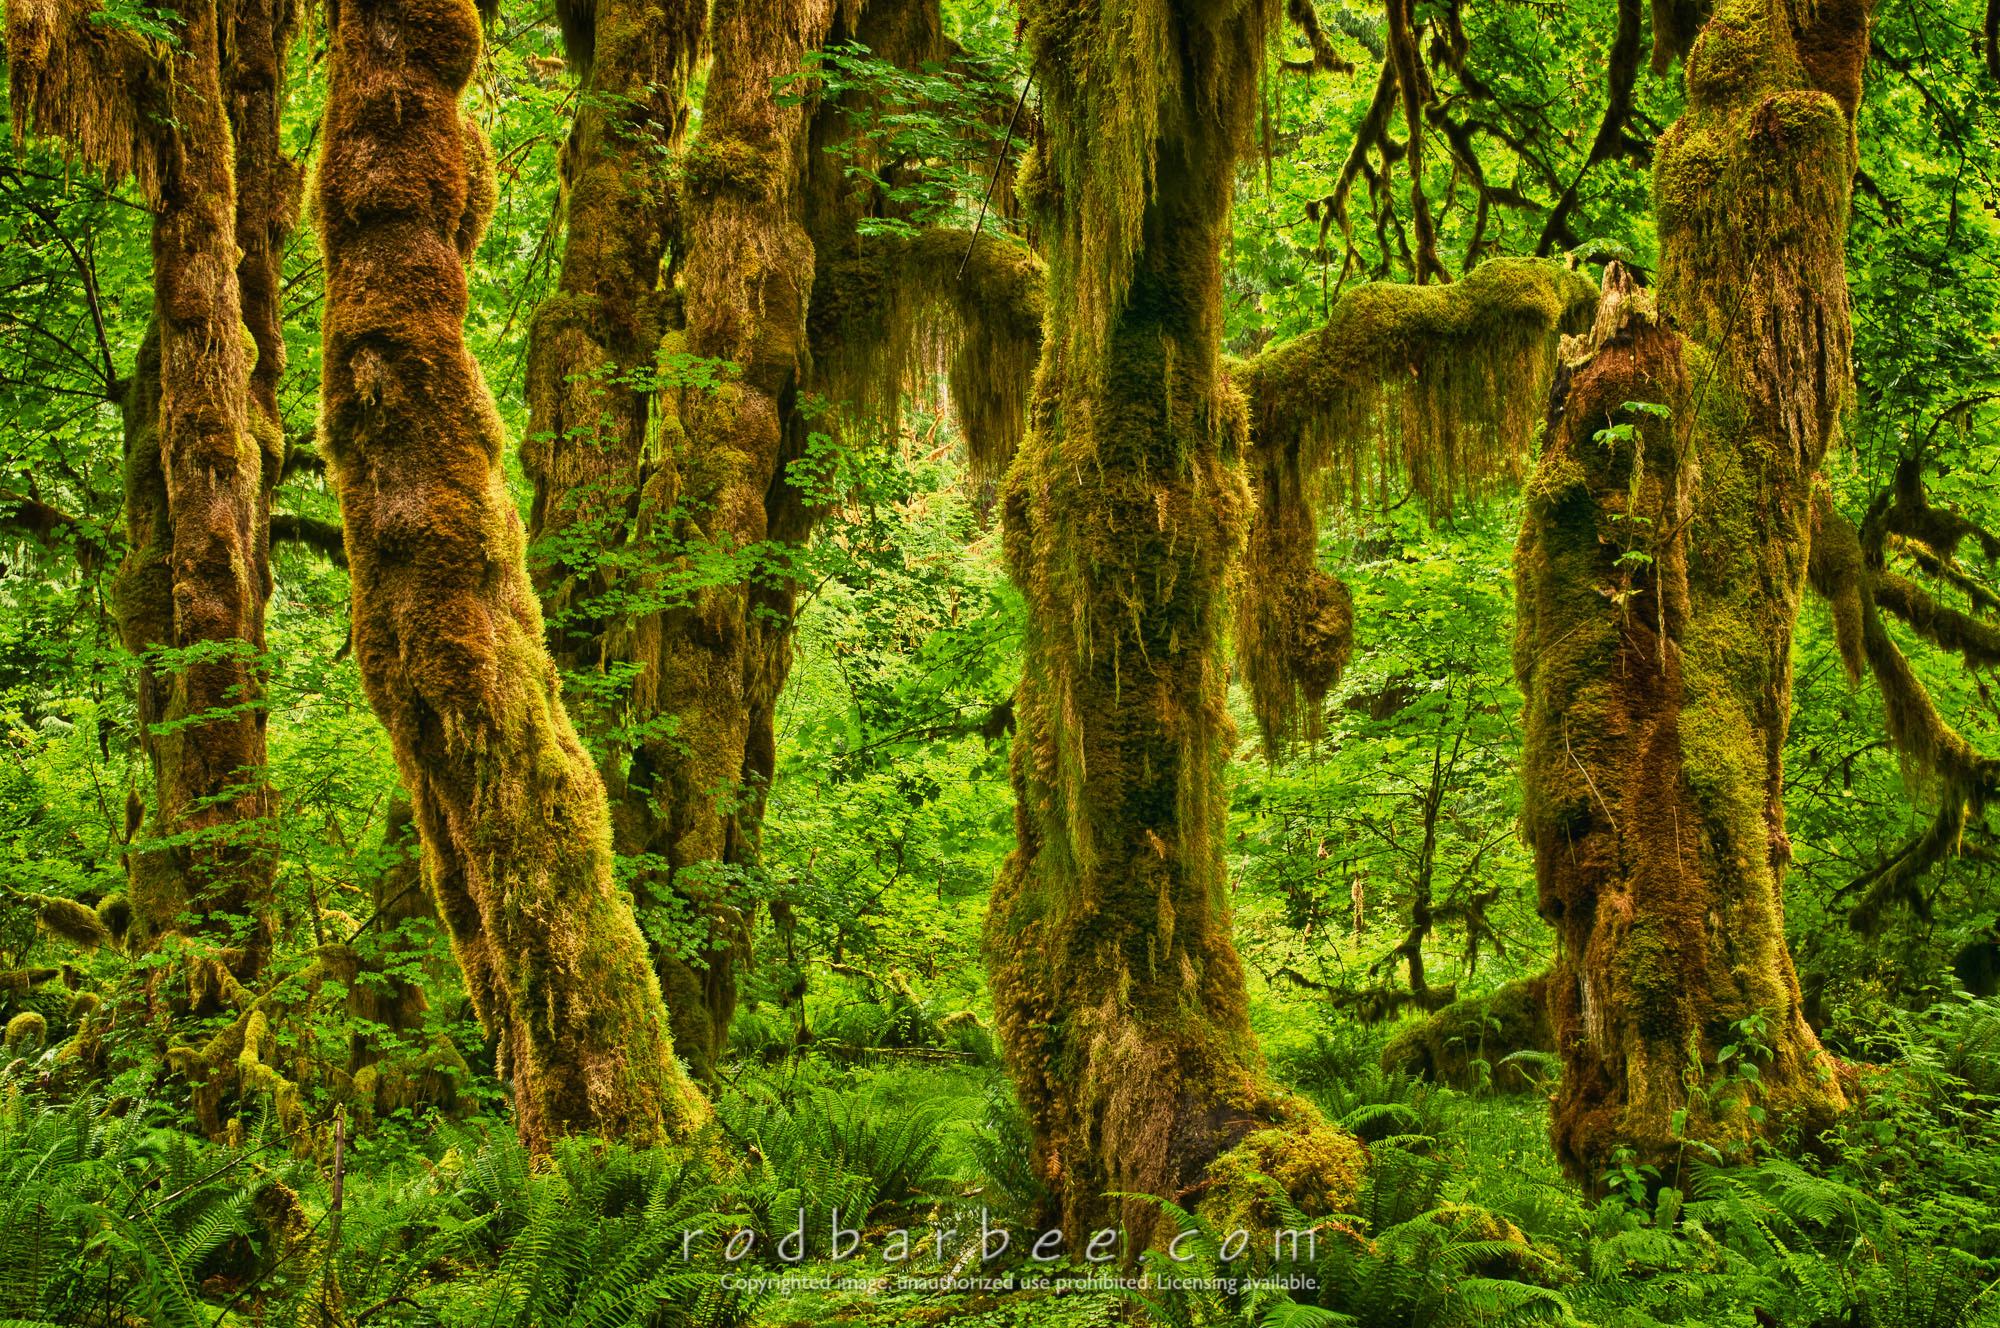 Barbee_110716_3_7925_HDR |  Maple grove, Hall of Mosses Trail, Hoh rainforest, Olympic National Park, WA